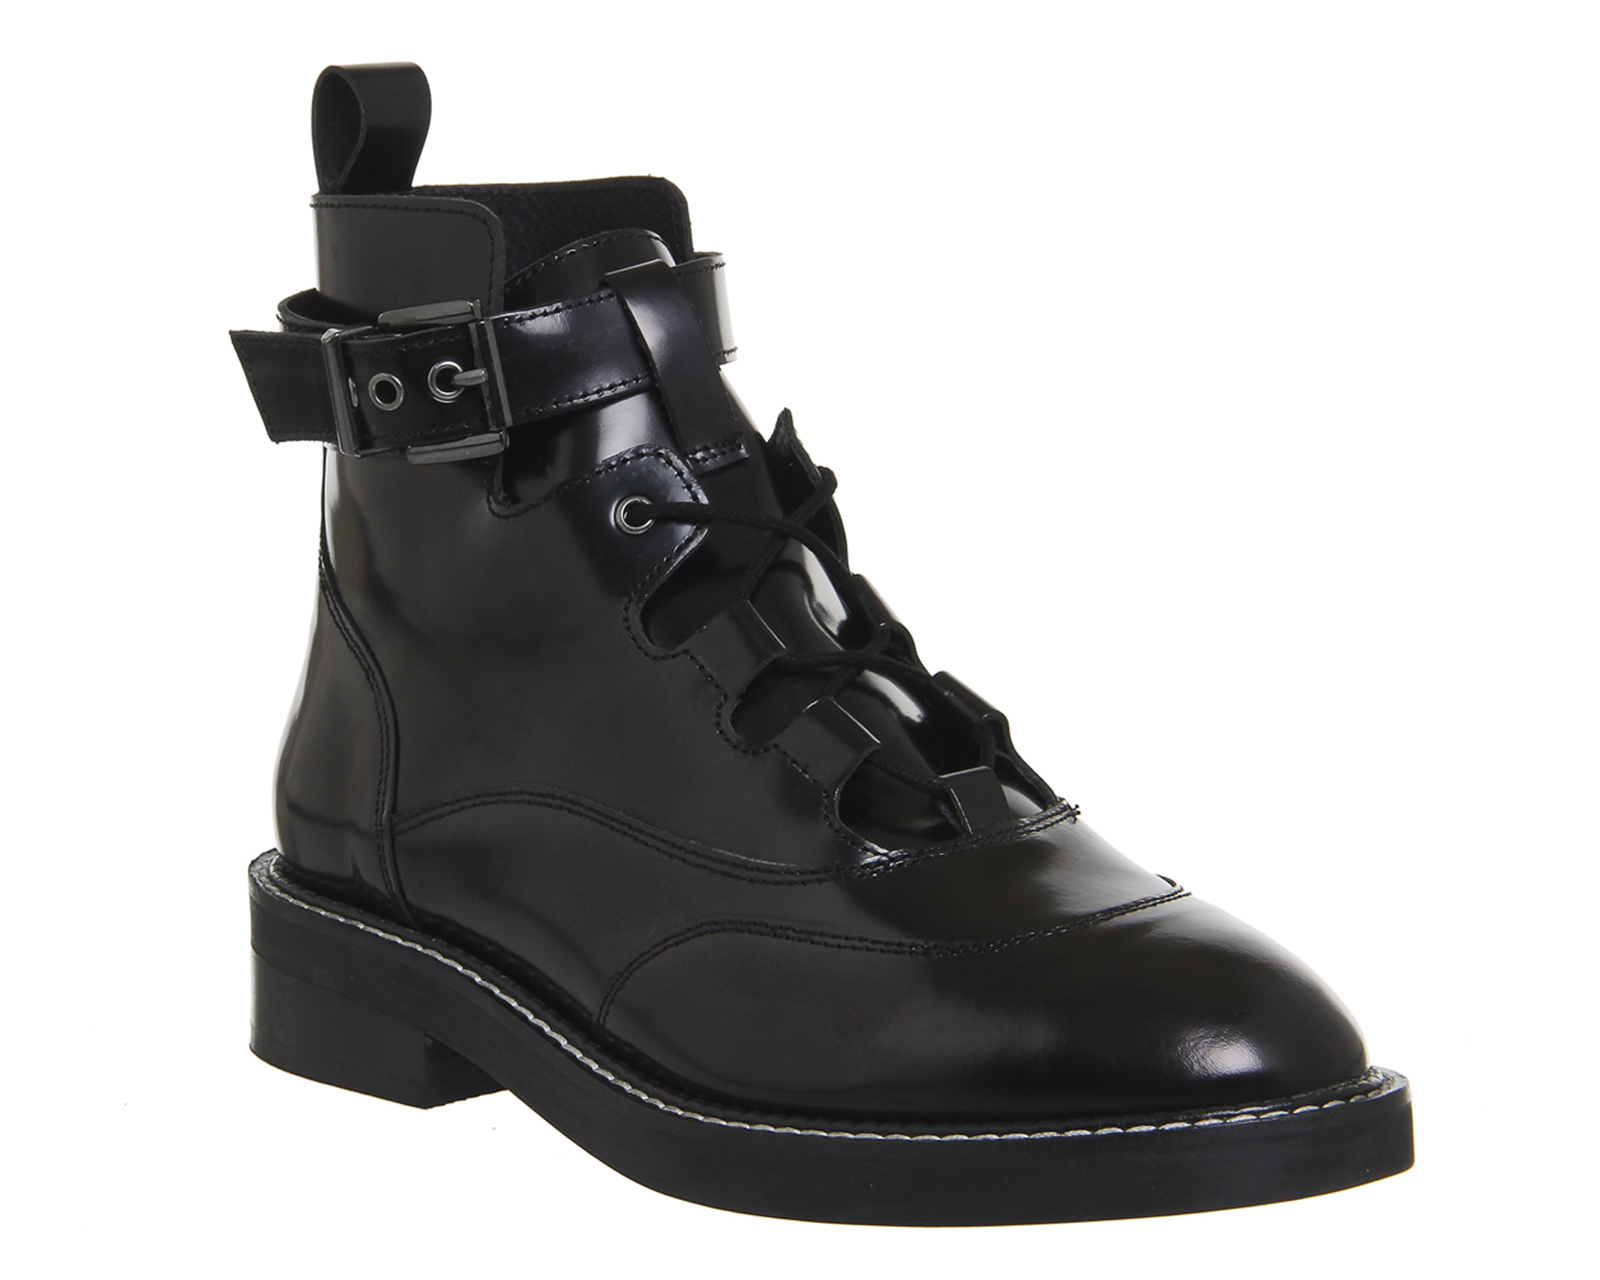 Office Lava Lace Up Buckle Boots Black 